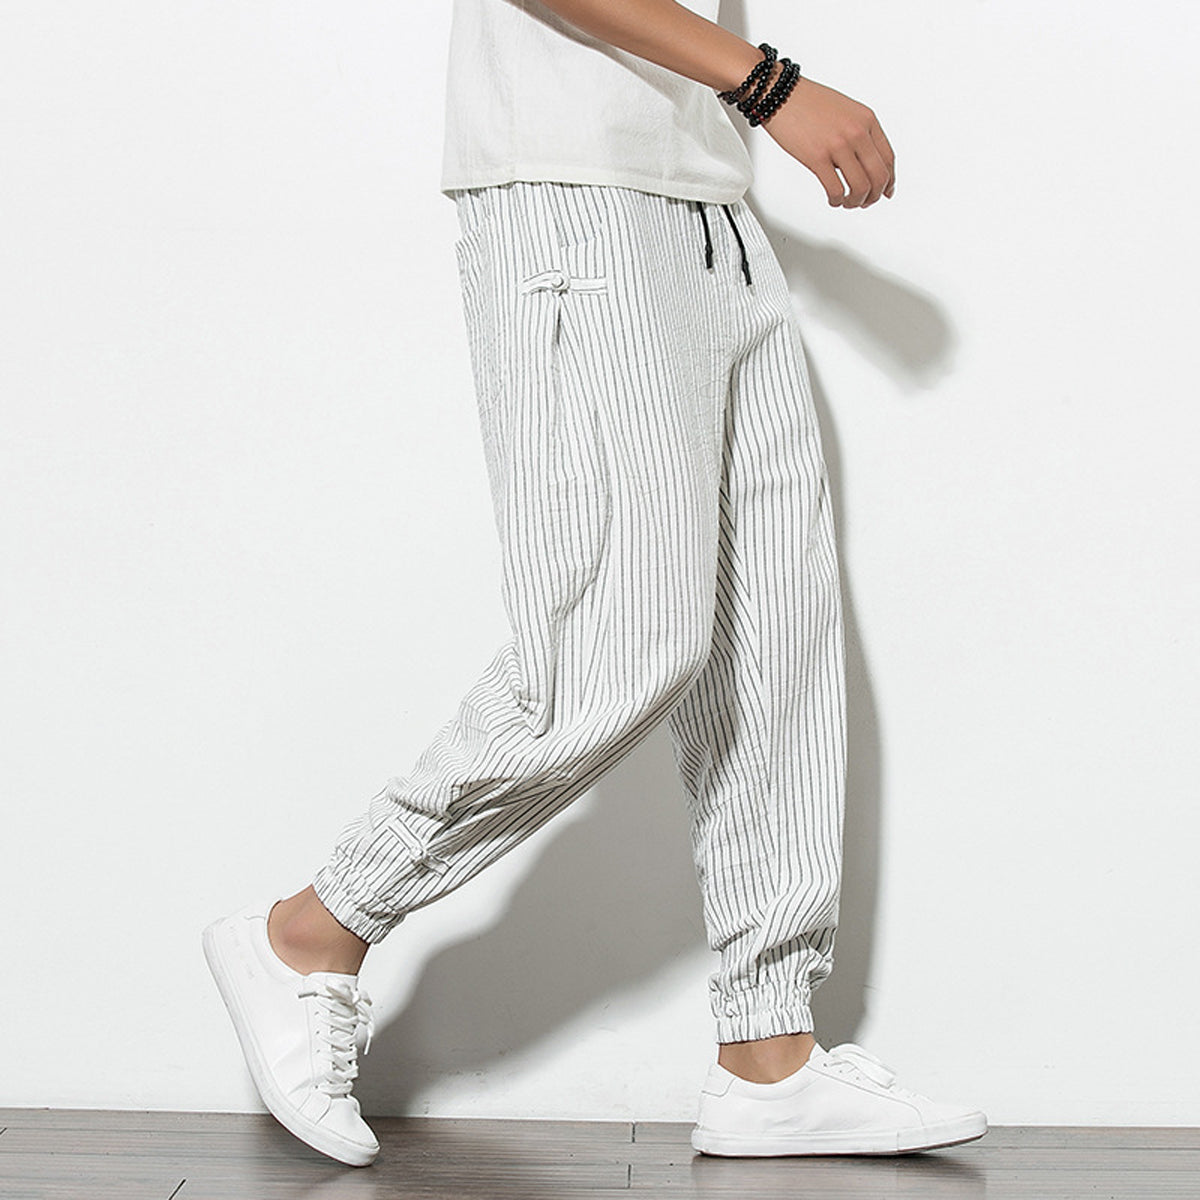 Men's Pants Loose Thin White Striped Jogger Breathable Casual Harem Pa –  Evalaxy